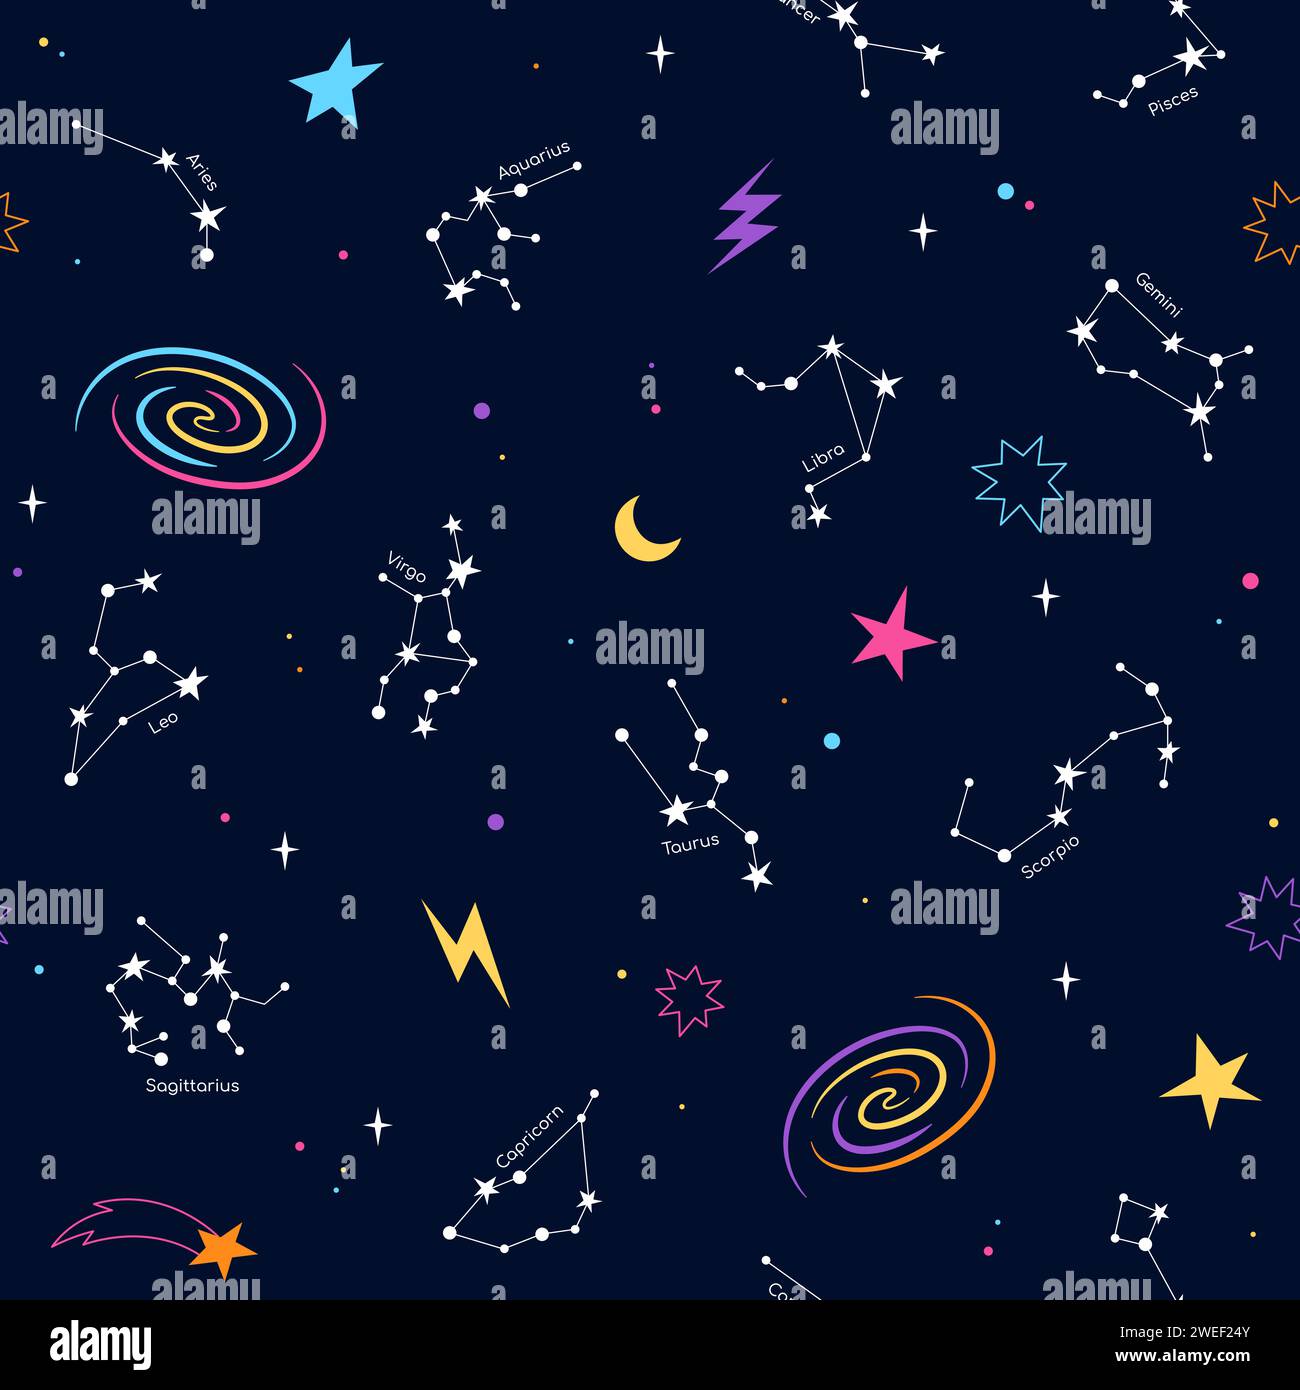 Zodiac constellation seamless pattern, space background. Cartoon, comic doodle illustration with stars, planets, galaxies. Stock Vector